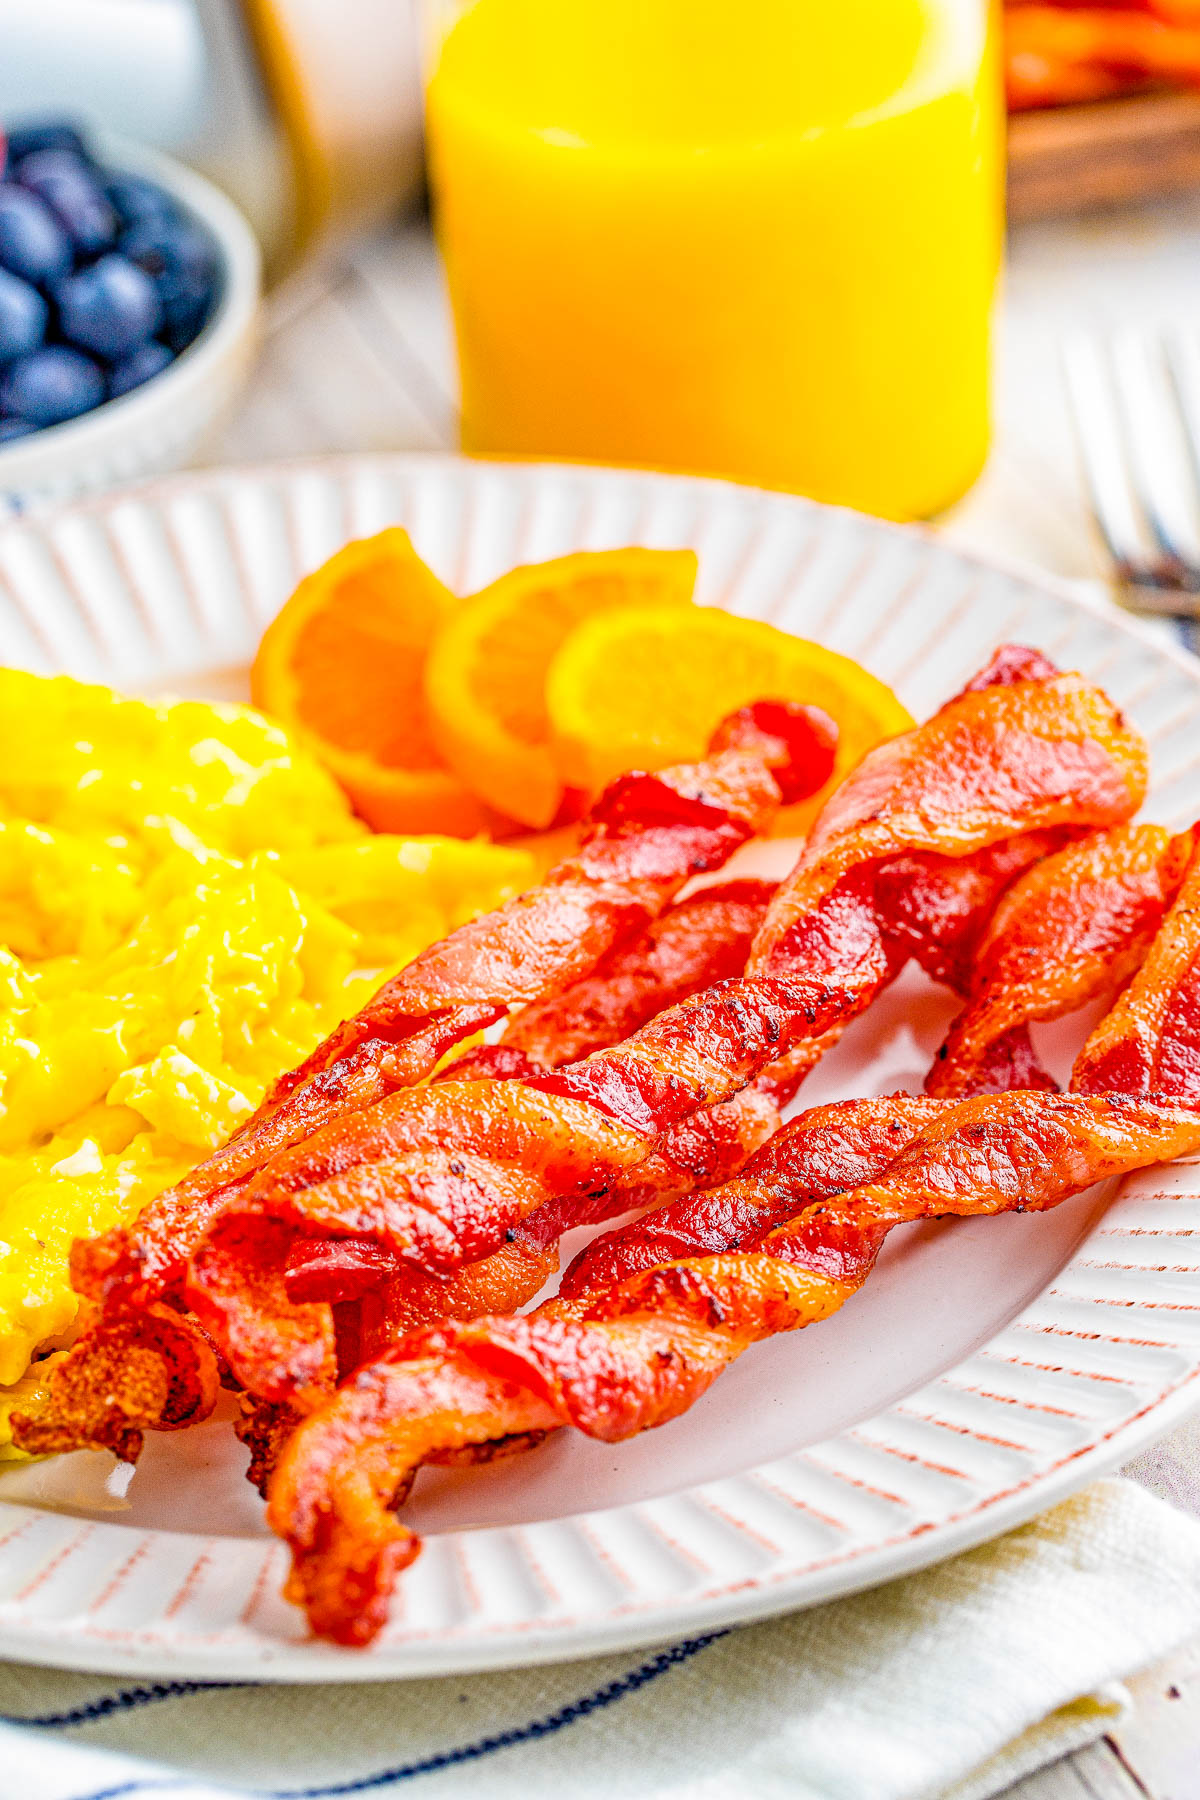 Air Fryer Twisted Bacon - Every bite of this twisted bacon is lightly crisped on the outside while being tender, juicy, and delicious on the inside! Learn how to make this TikTok trend-inspired bacon in your air fryer. FAST, EASY, and so crave-worthy! Oven baking instructions also provided.